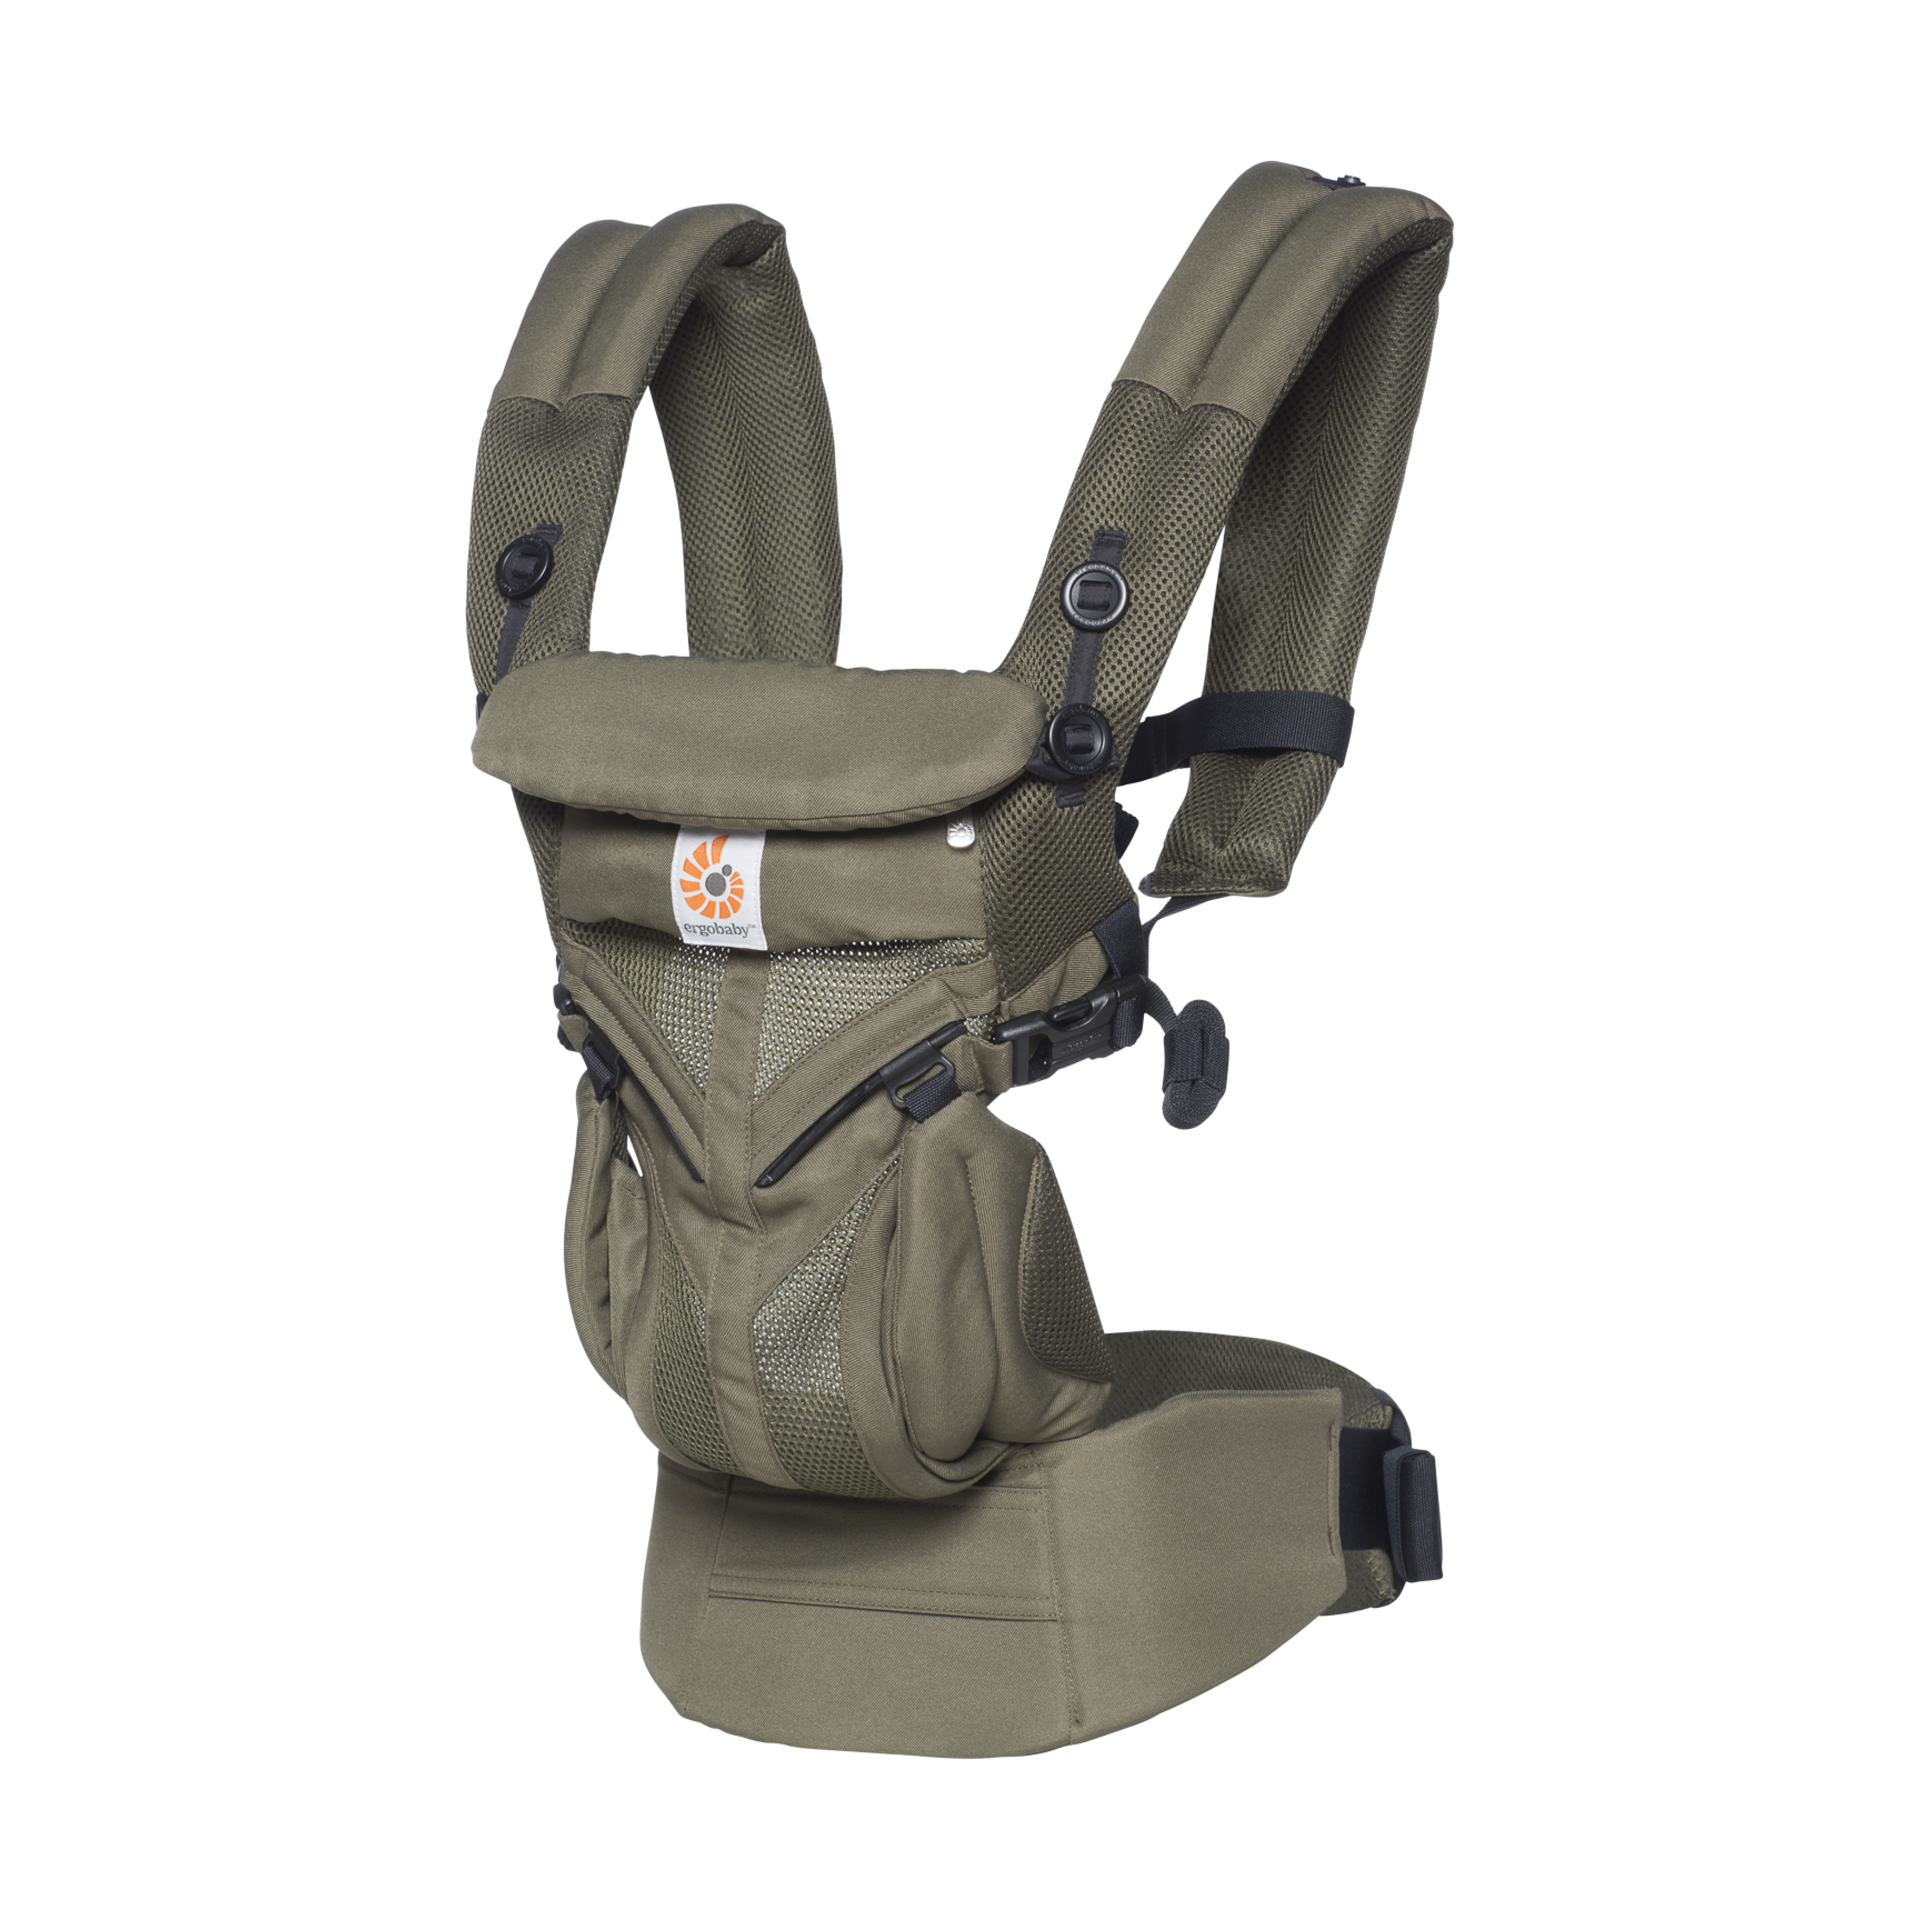 ergobaby 360 all positions baby carrier cool air mesh